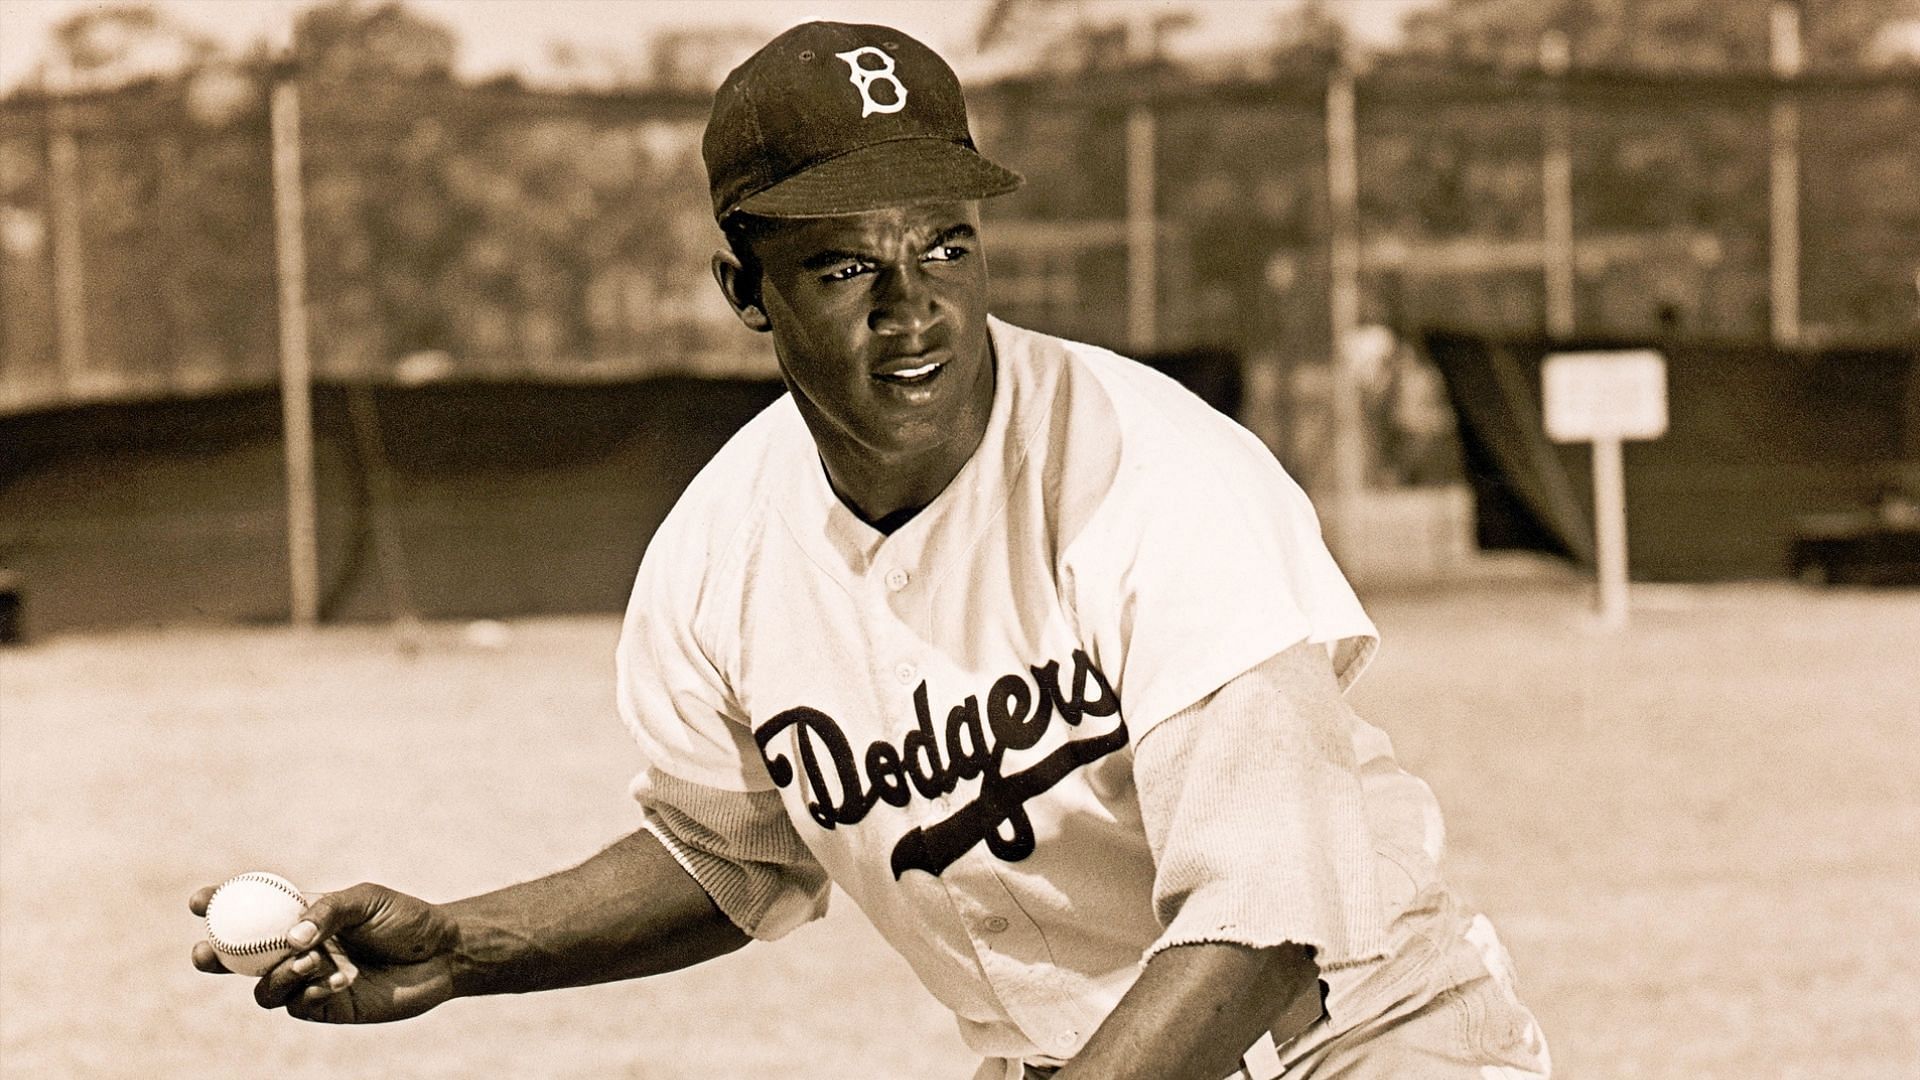 Jackie Robinson's 42 in Dodger blue for all uniforms on April 15 -  Washington Times